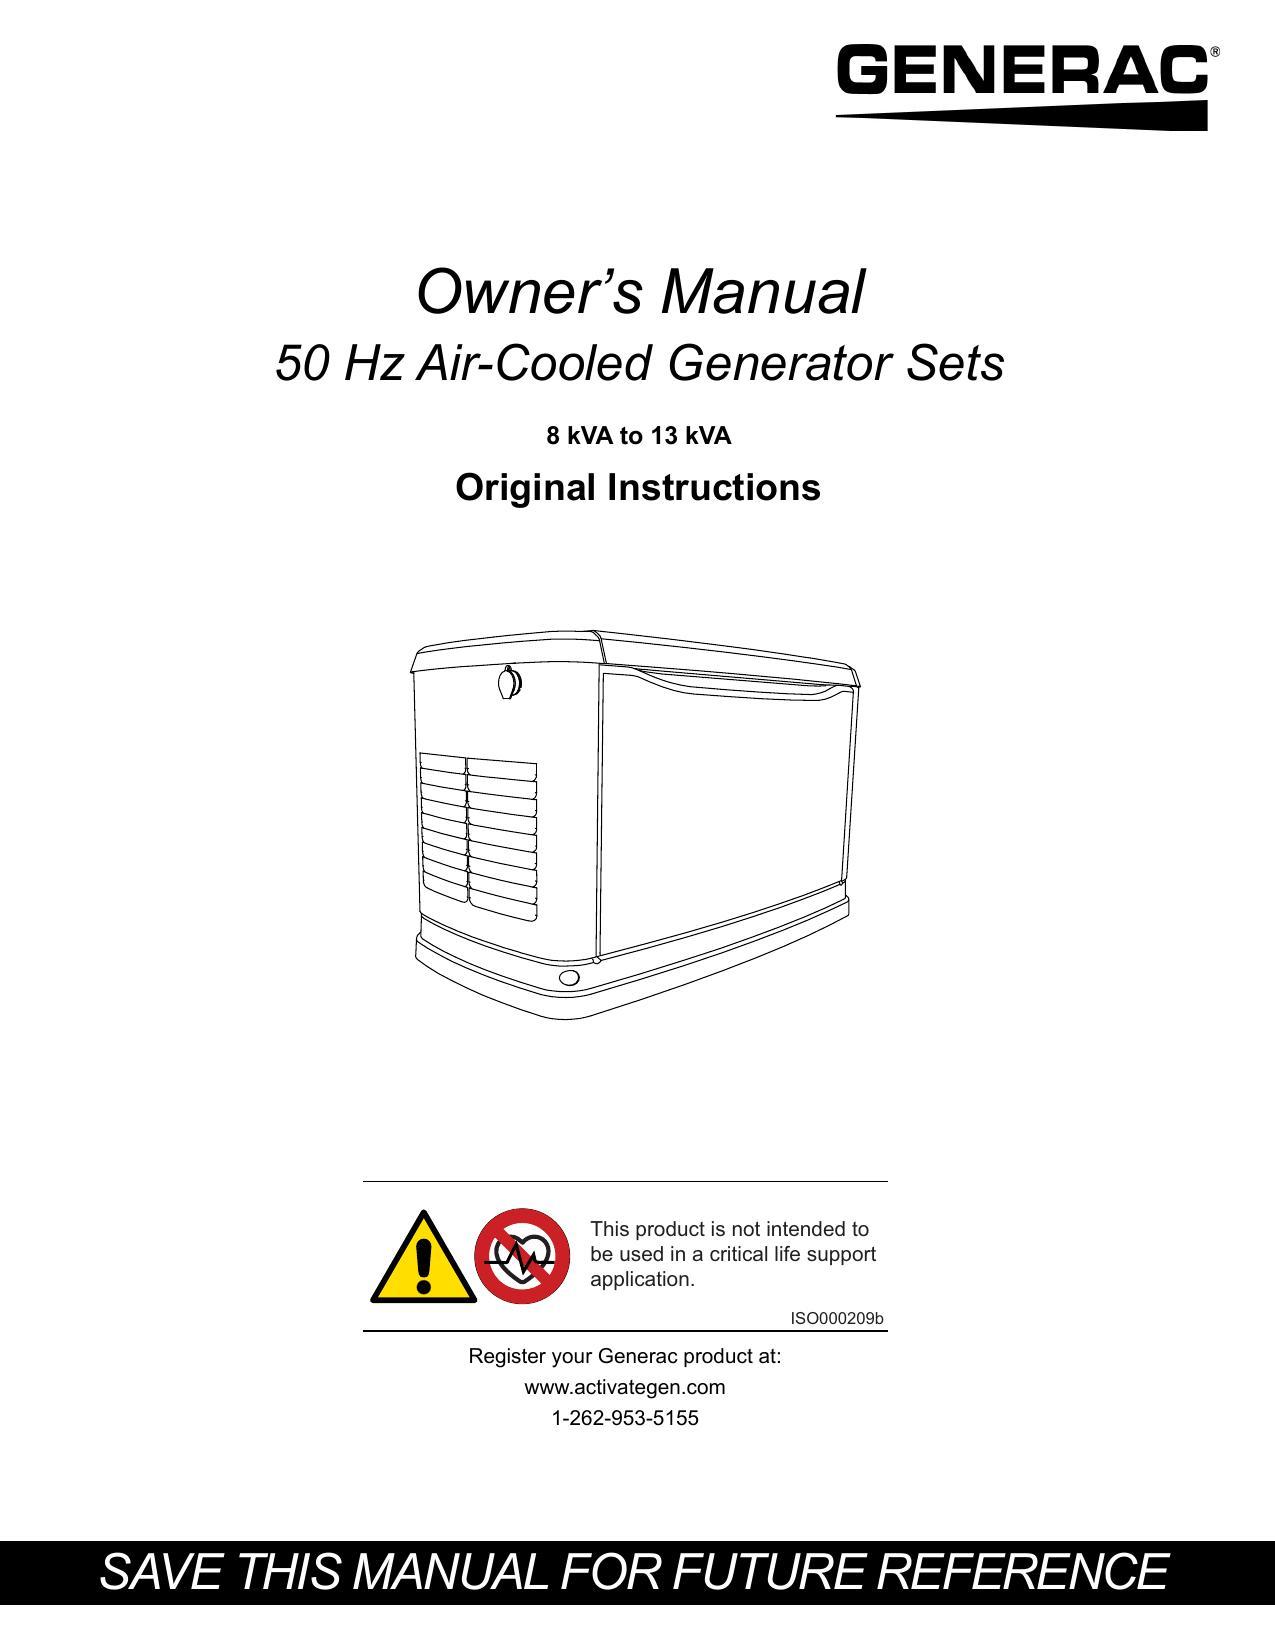 owners-manual-for-50-hz-air-cooled-generator-sets.pdf